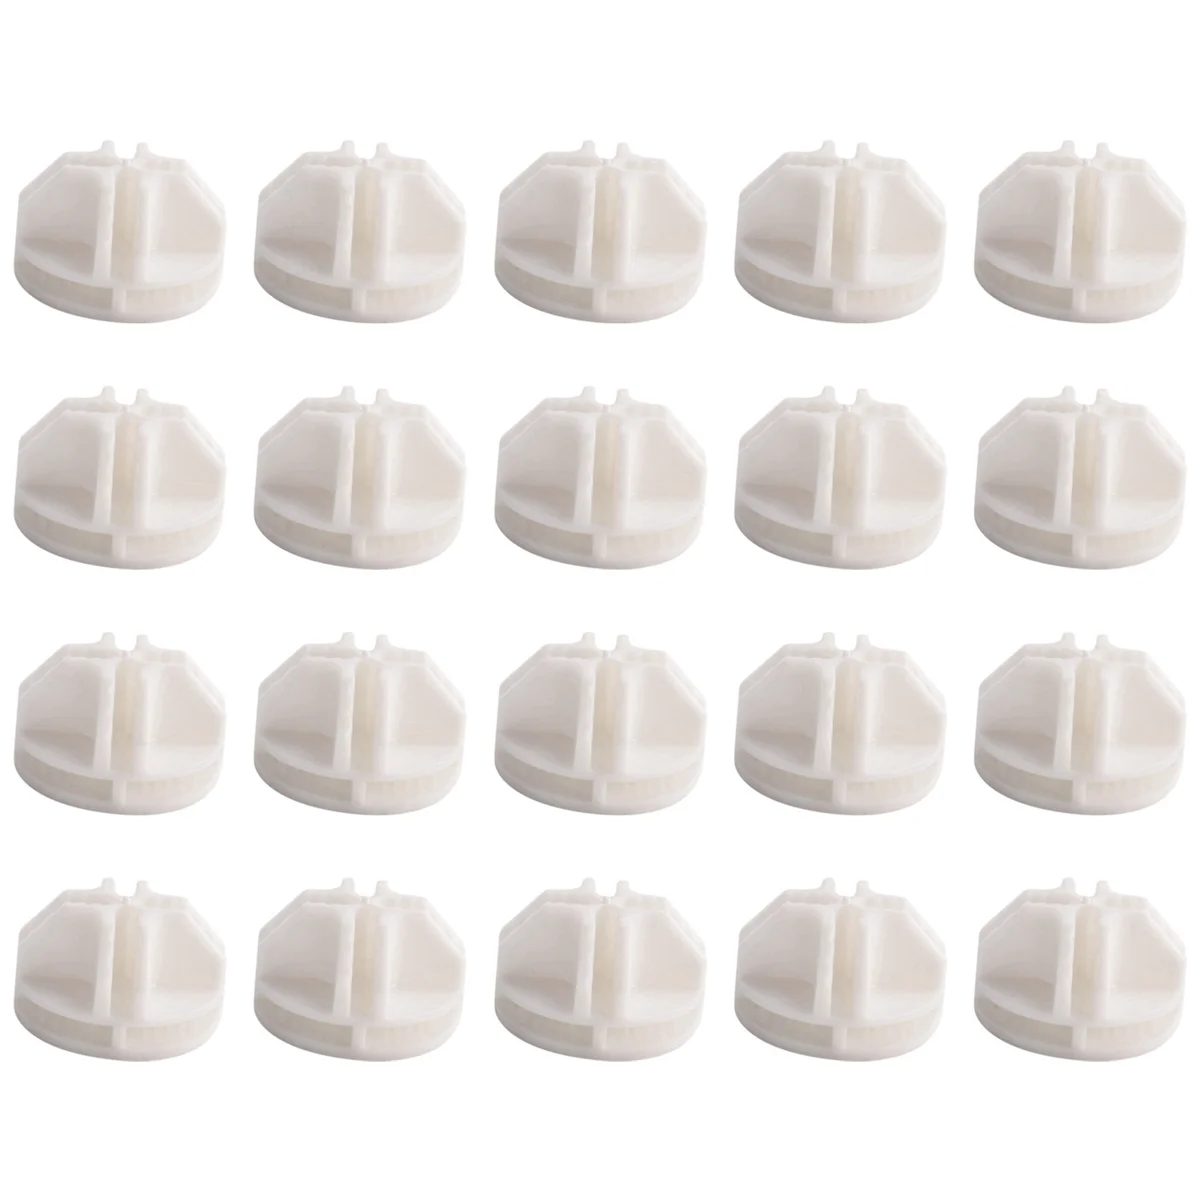 

20 Pcs Grid Cube Connector Abs Connectors For Wire Cube Storage Shelving (White)